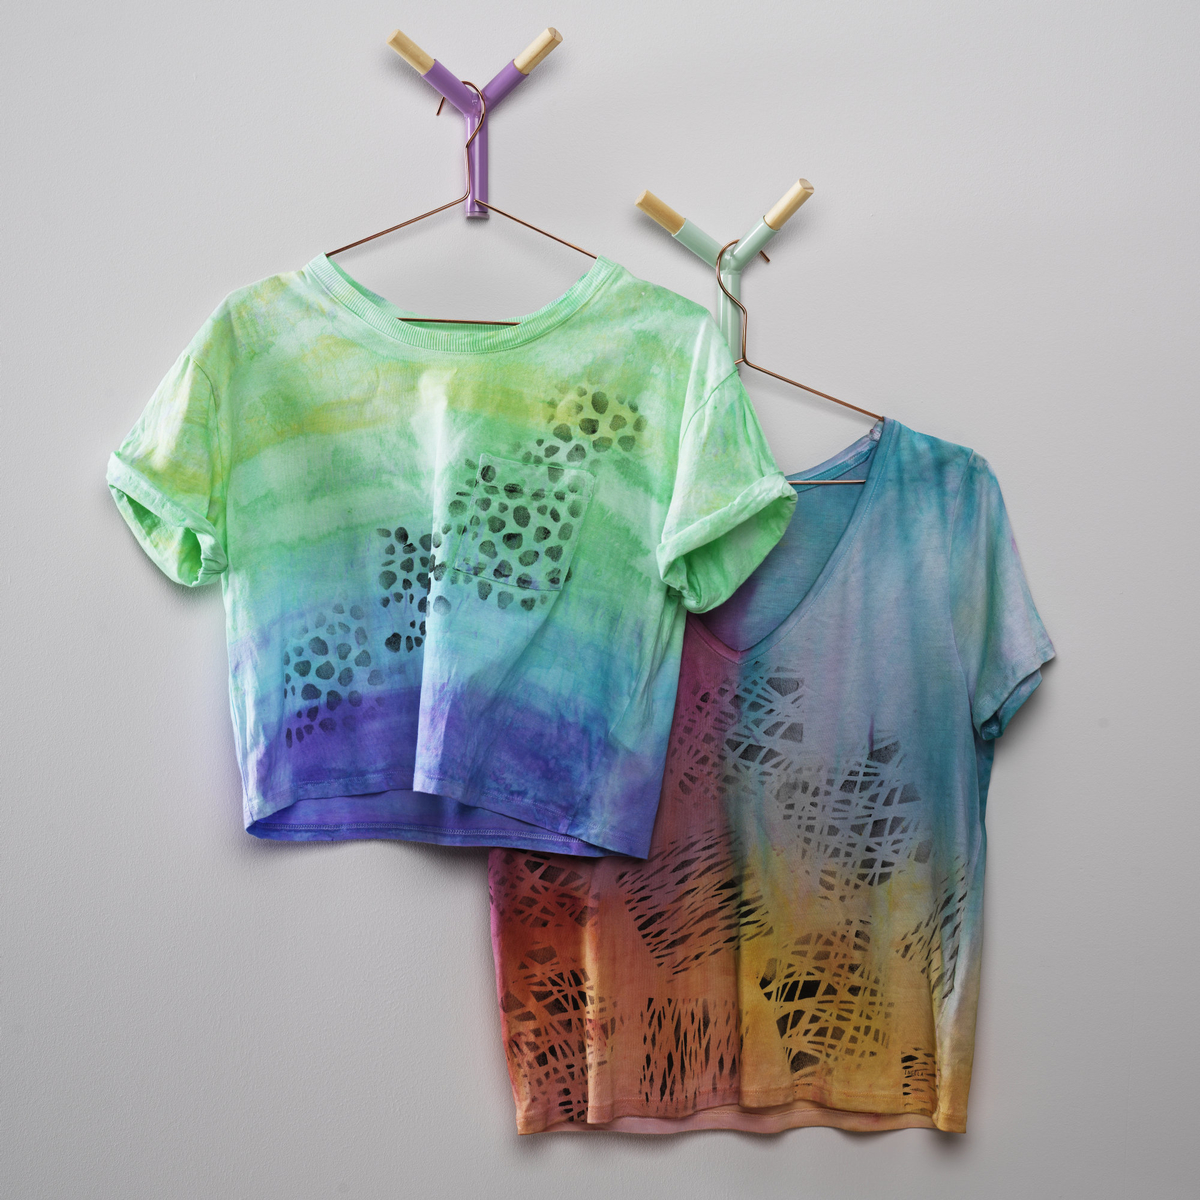 Give your T-shirt a second chance with fabric paint